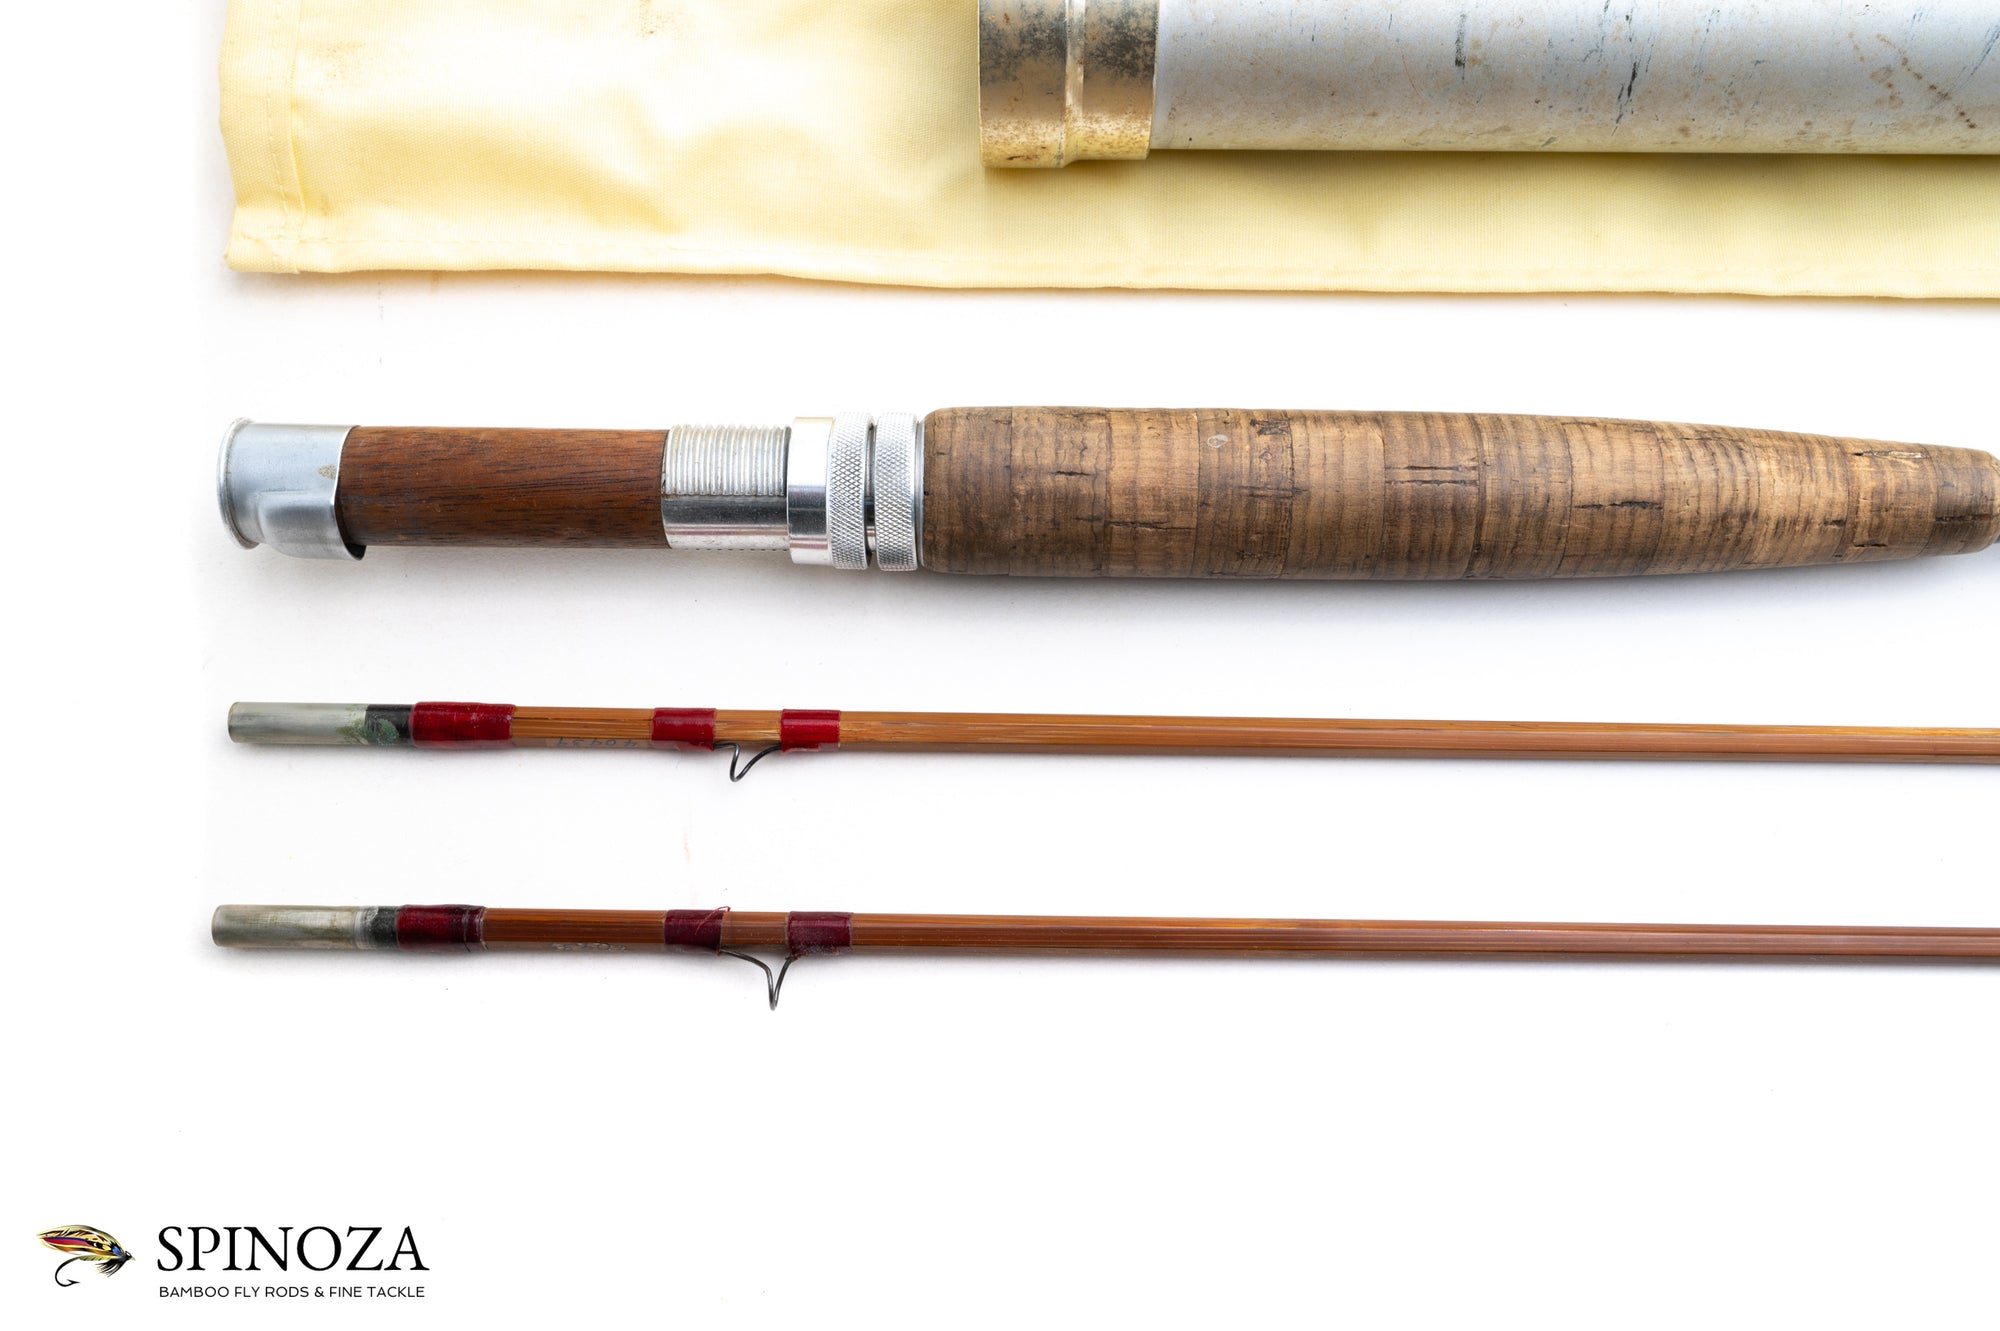 VINTAGE ORVIS BAMBOO Fishing Rod 7'6” 4piece $104.37 - PicClick